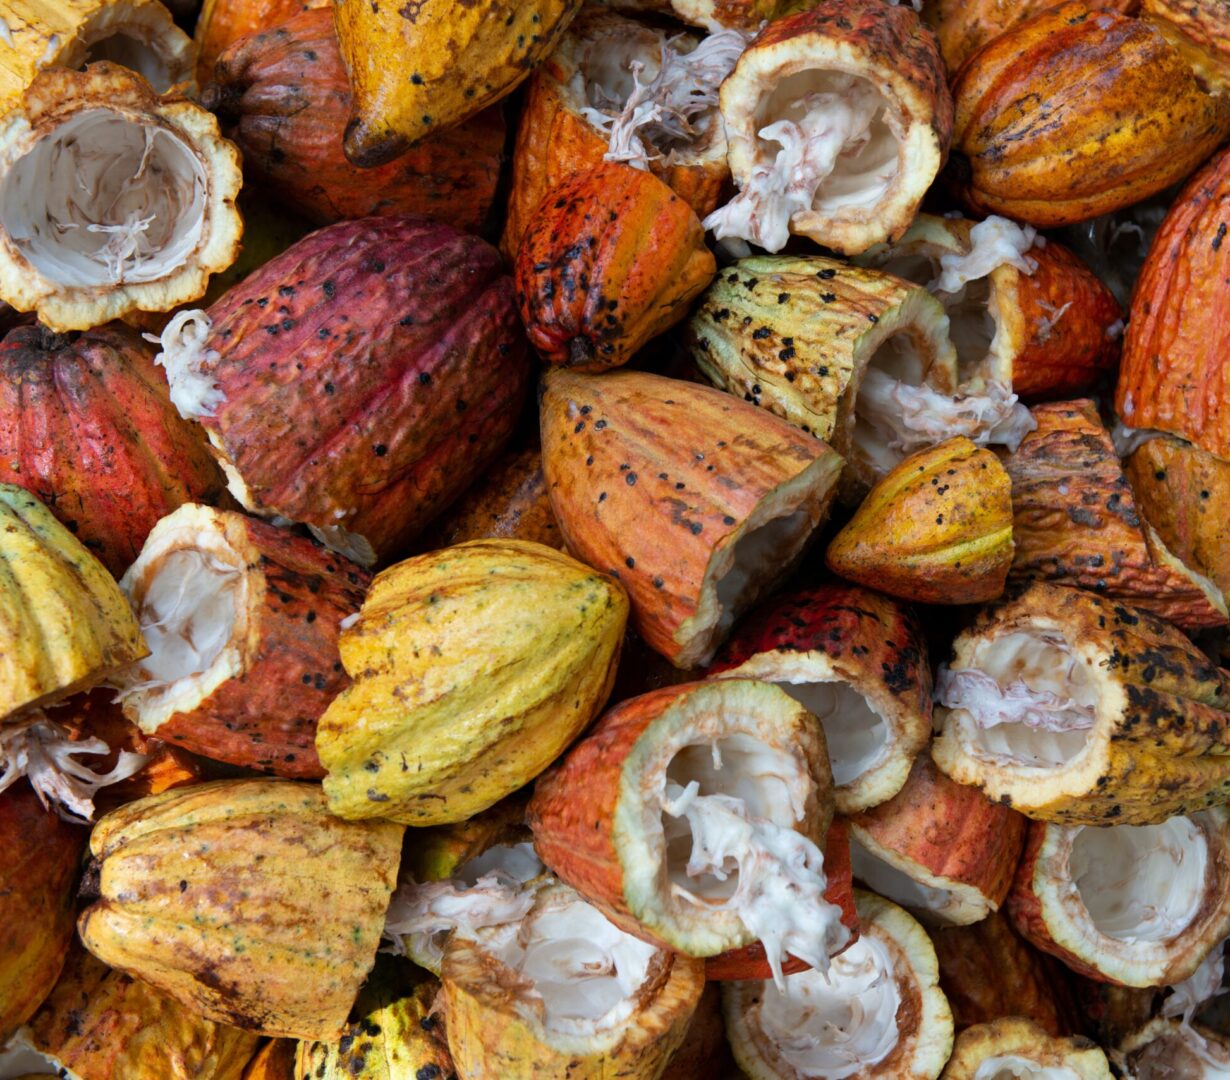 Dynamic Agroforestry in Cacao